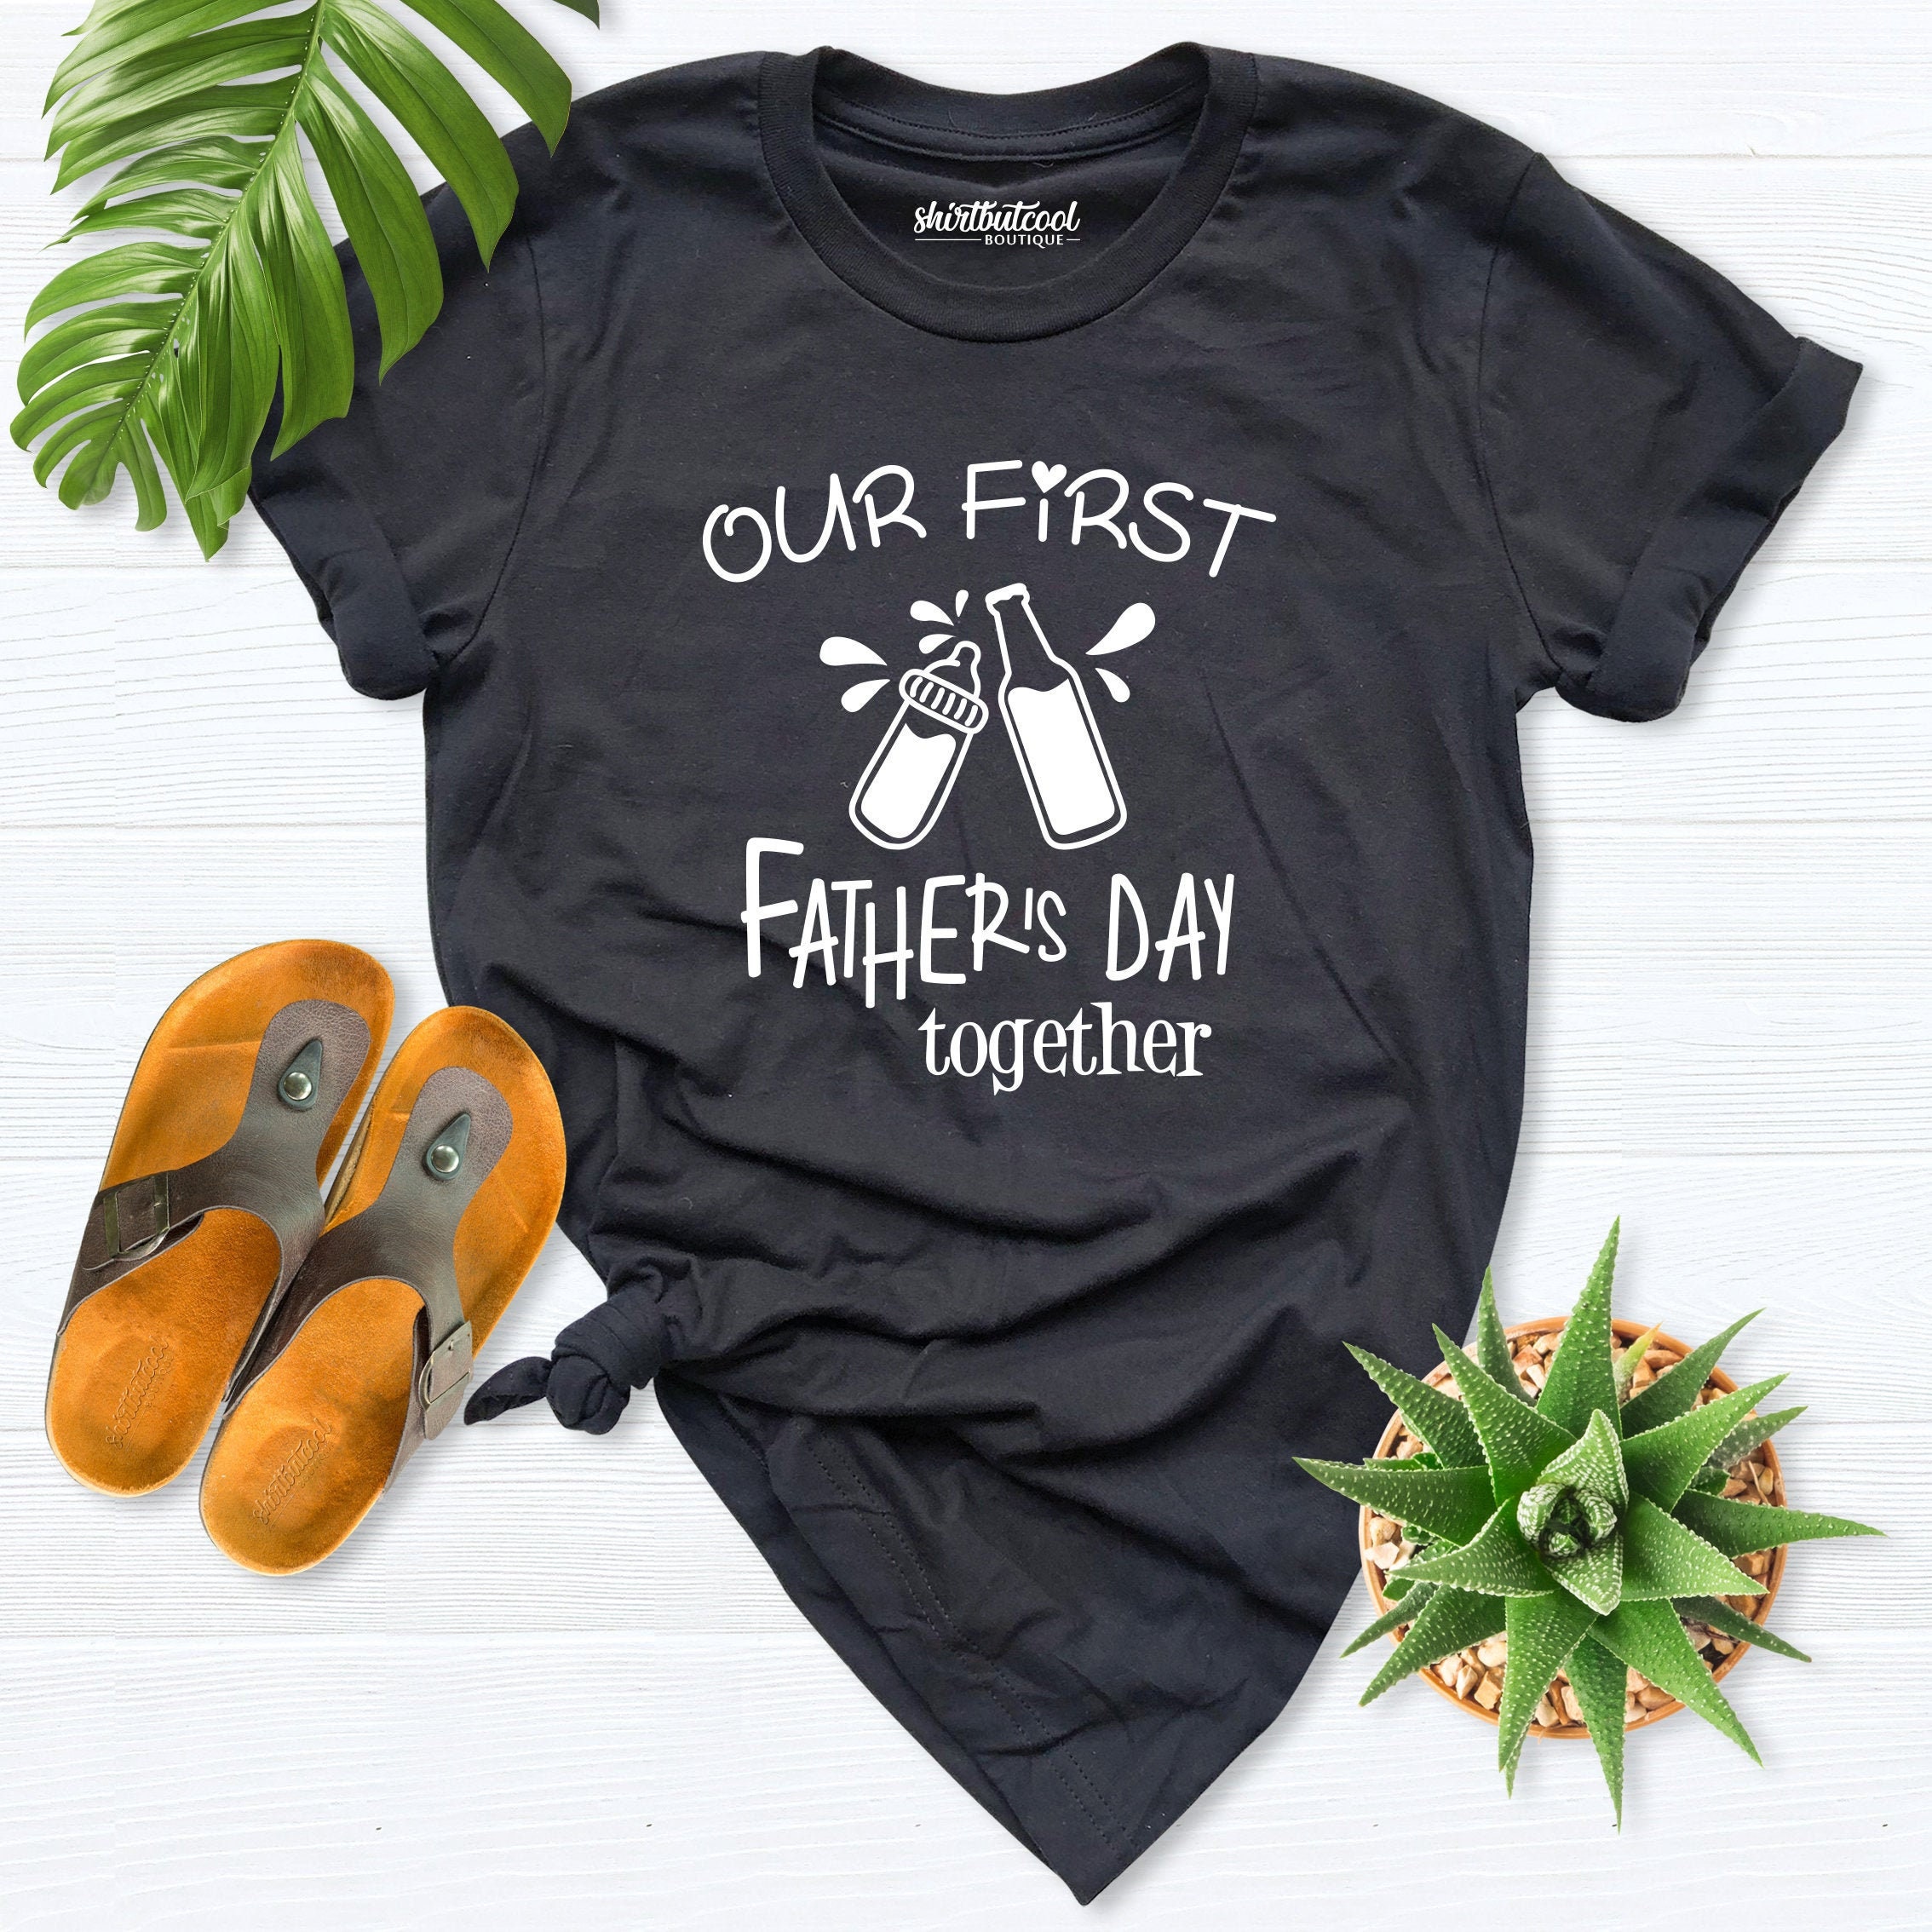 A son's first hero a daughter's first love dad dallas cowboys happy  father's day shirt - Guineashirt Premium ™ LLC